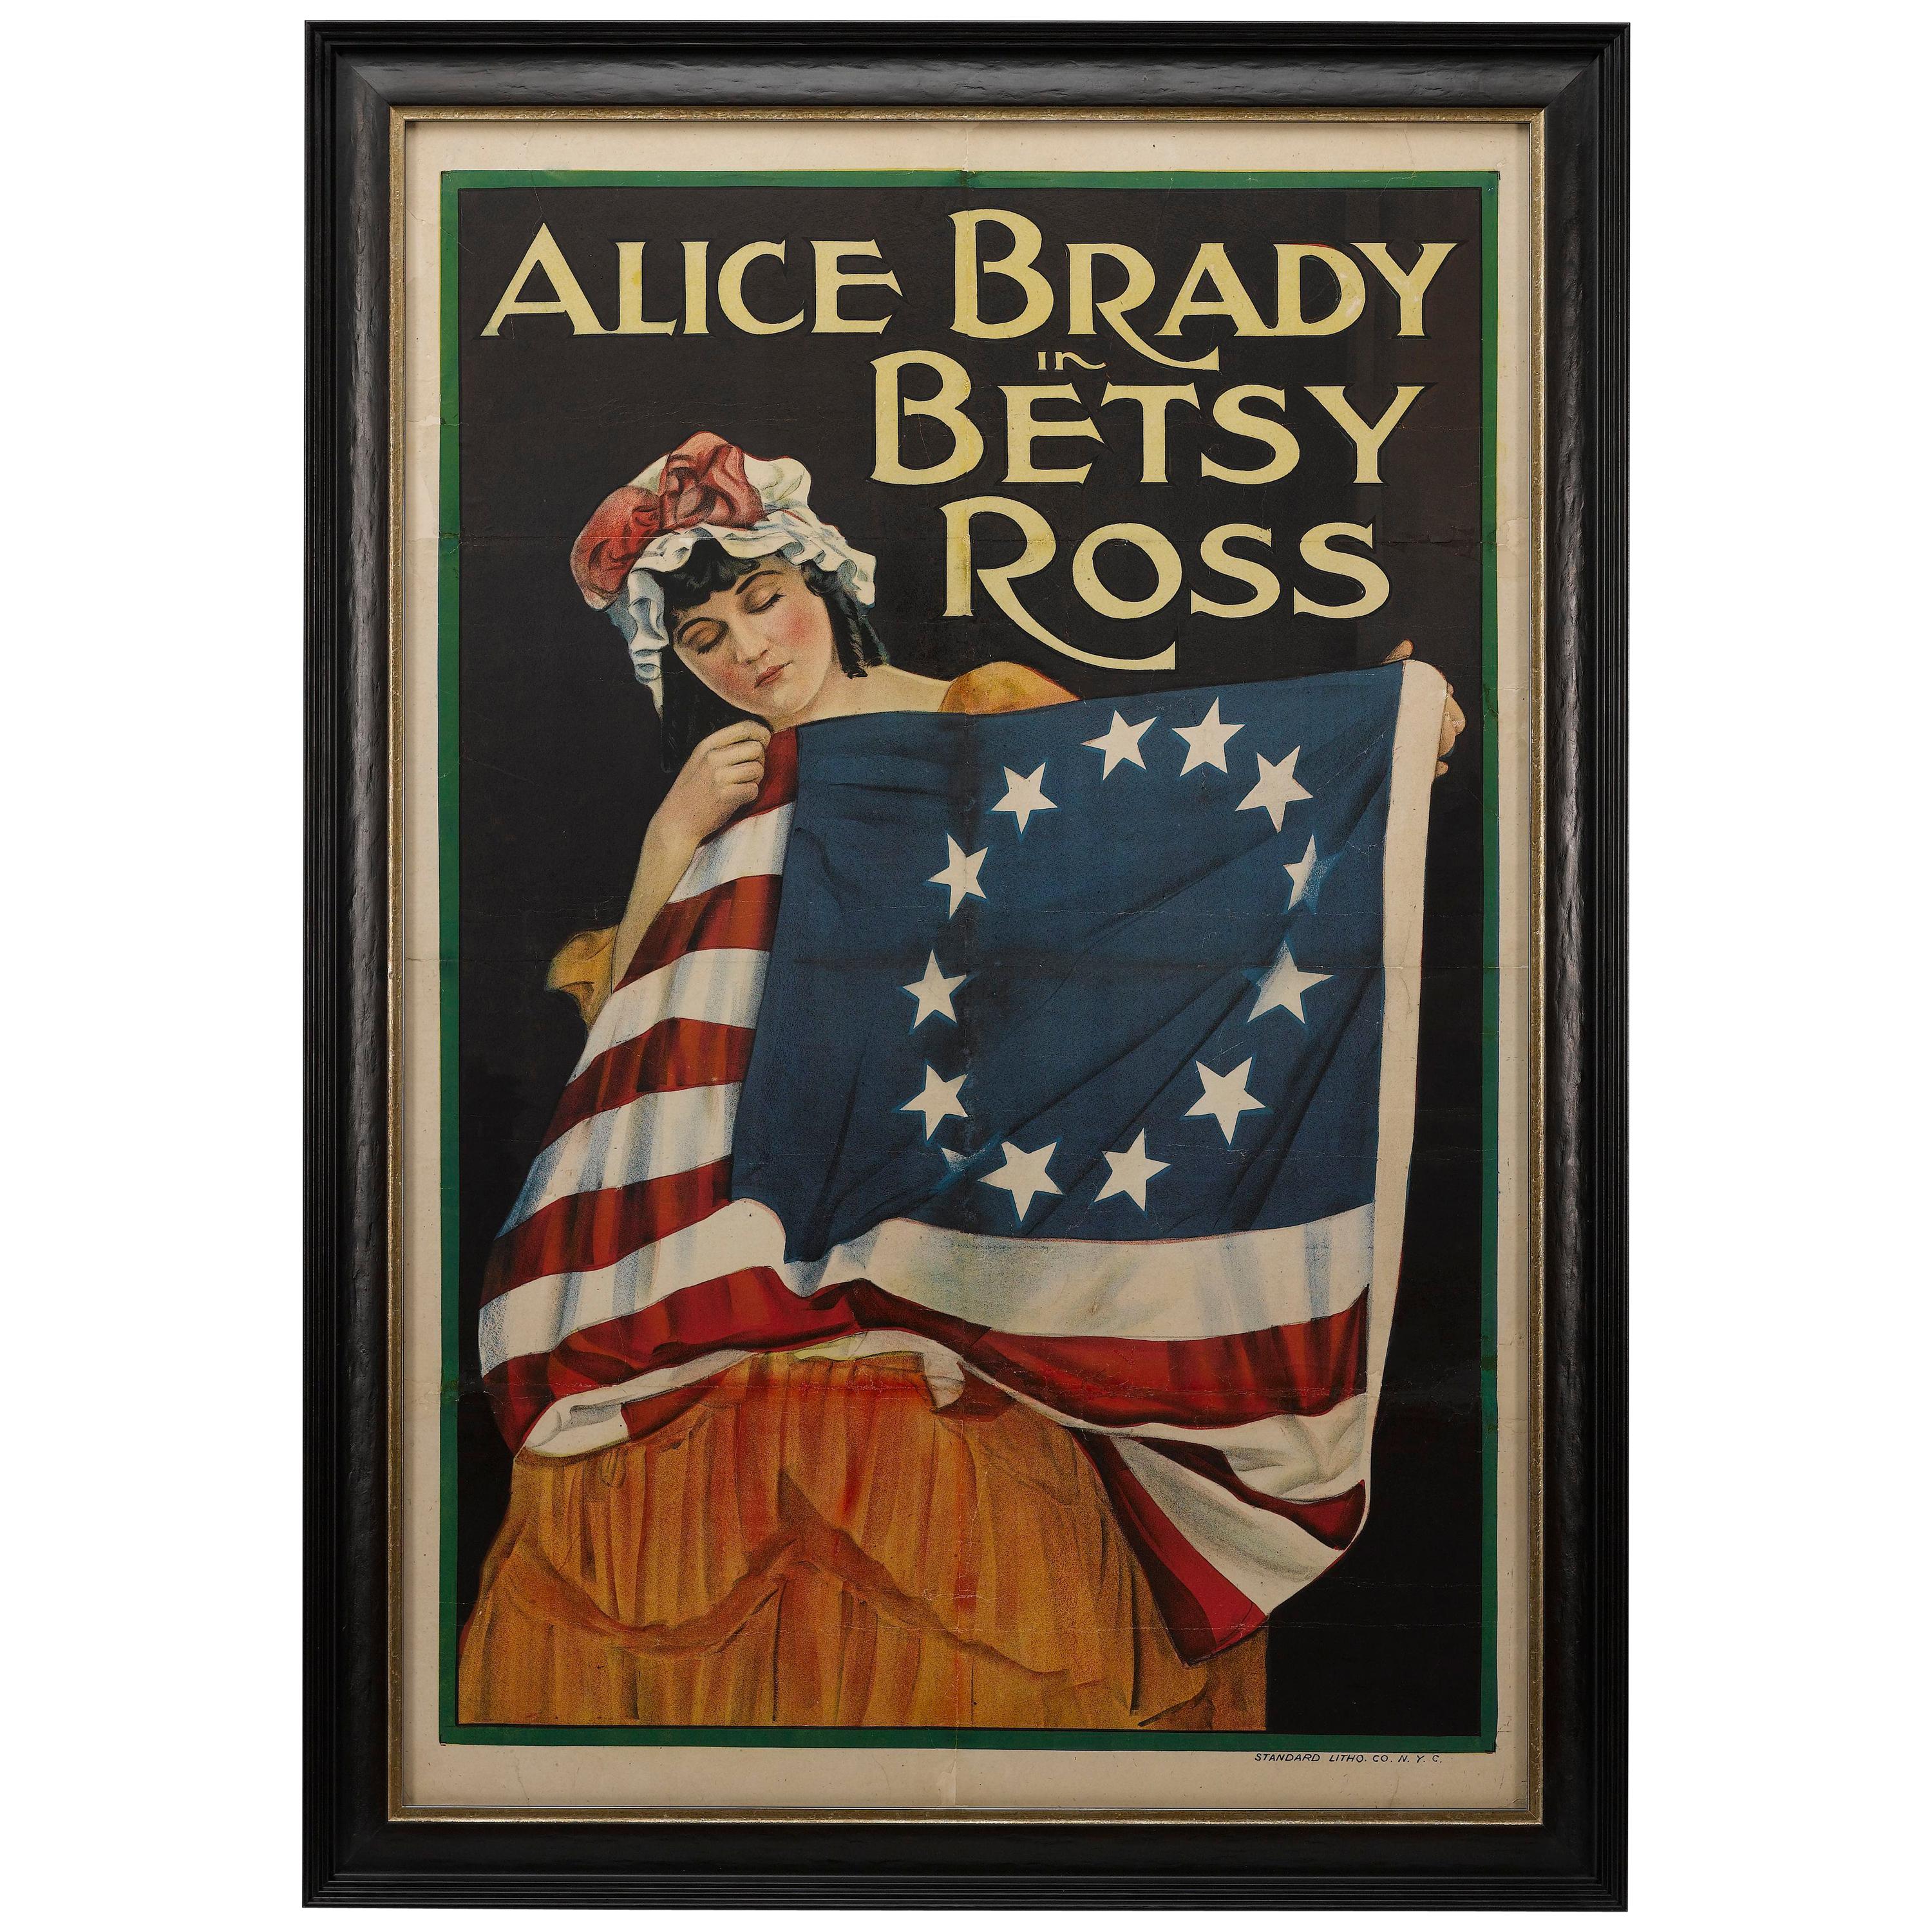 "Alice Brady in Betsy Ross" Vintage WWI Poster, circa 1917